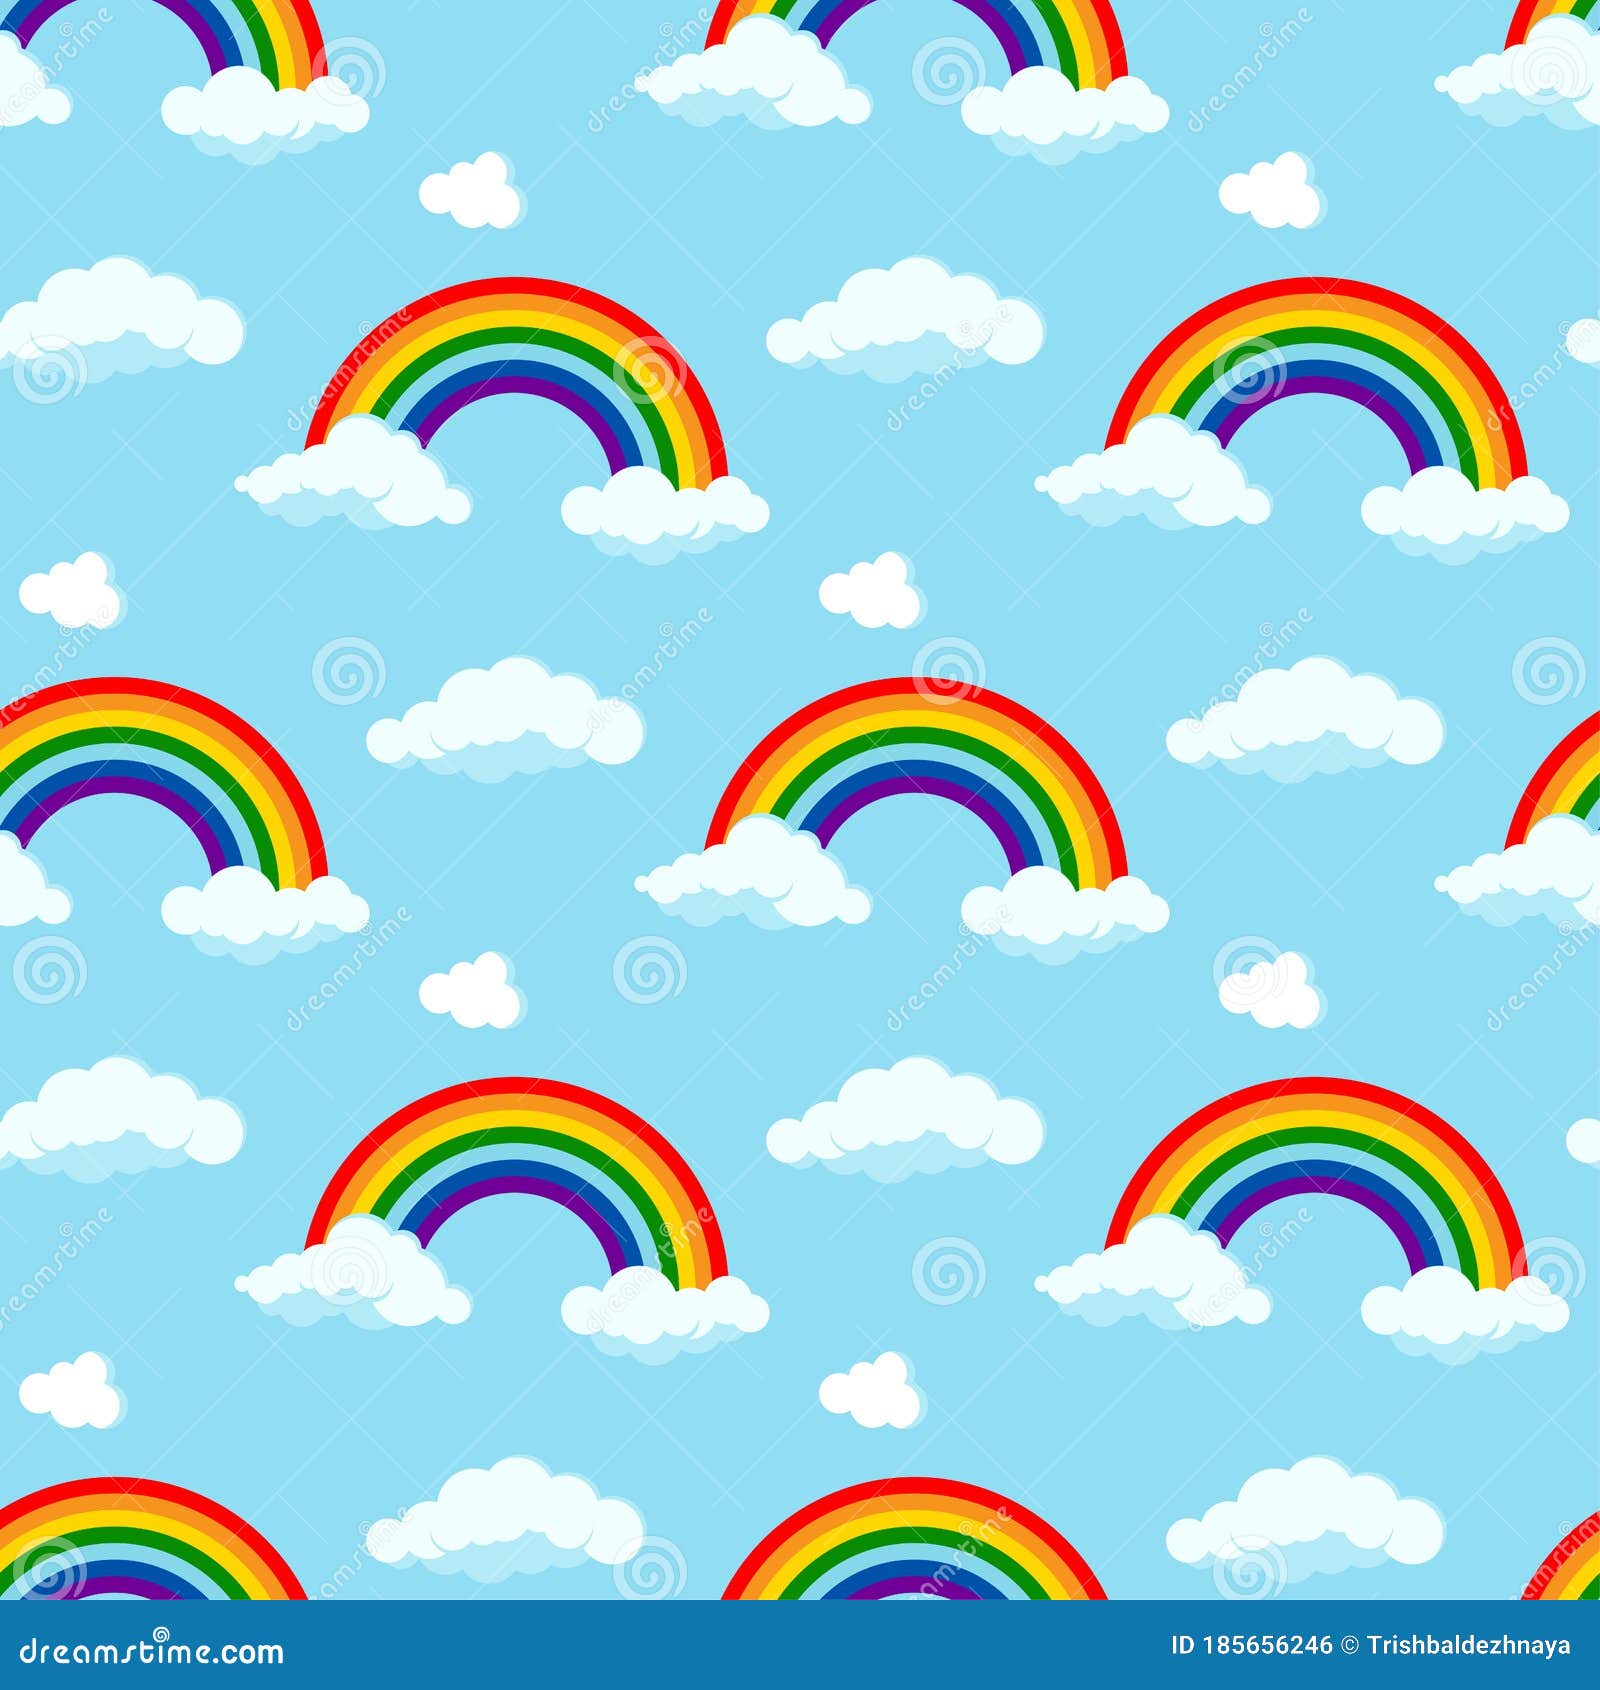 Rainbow with Clouds at the Ends Seamless Pattern on Sky Blue Background  Stock Vector - Illustration of seamless, baby: 185656246